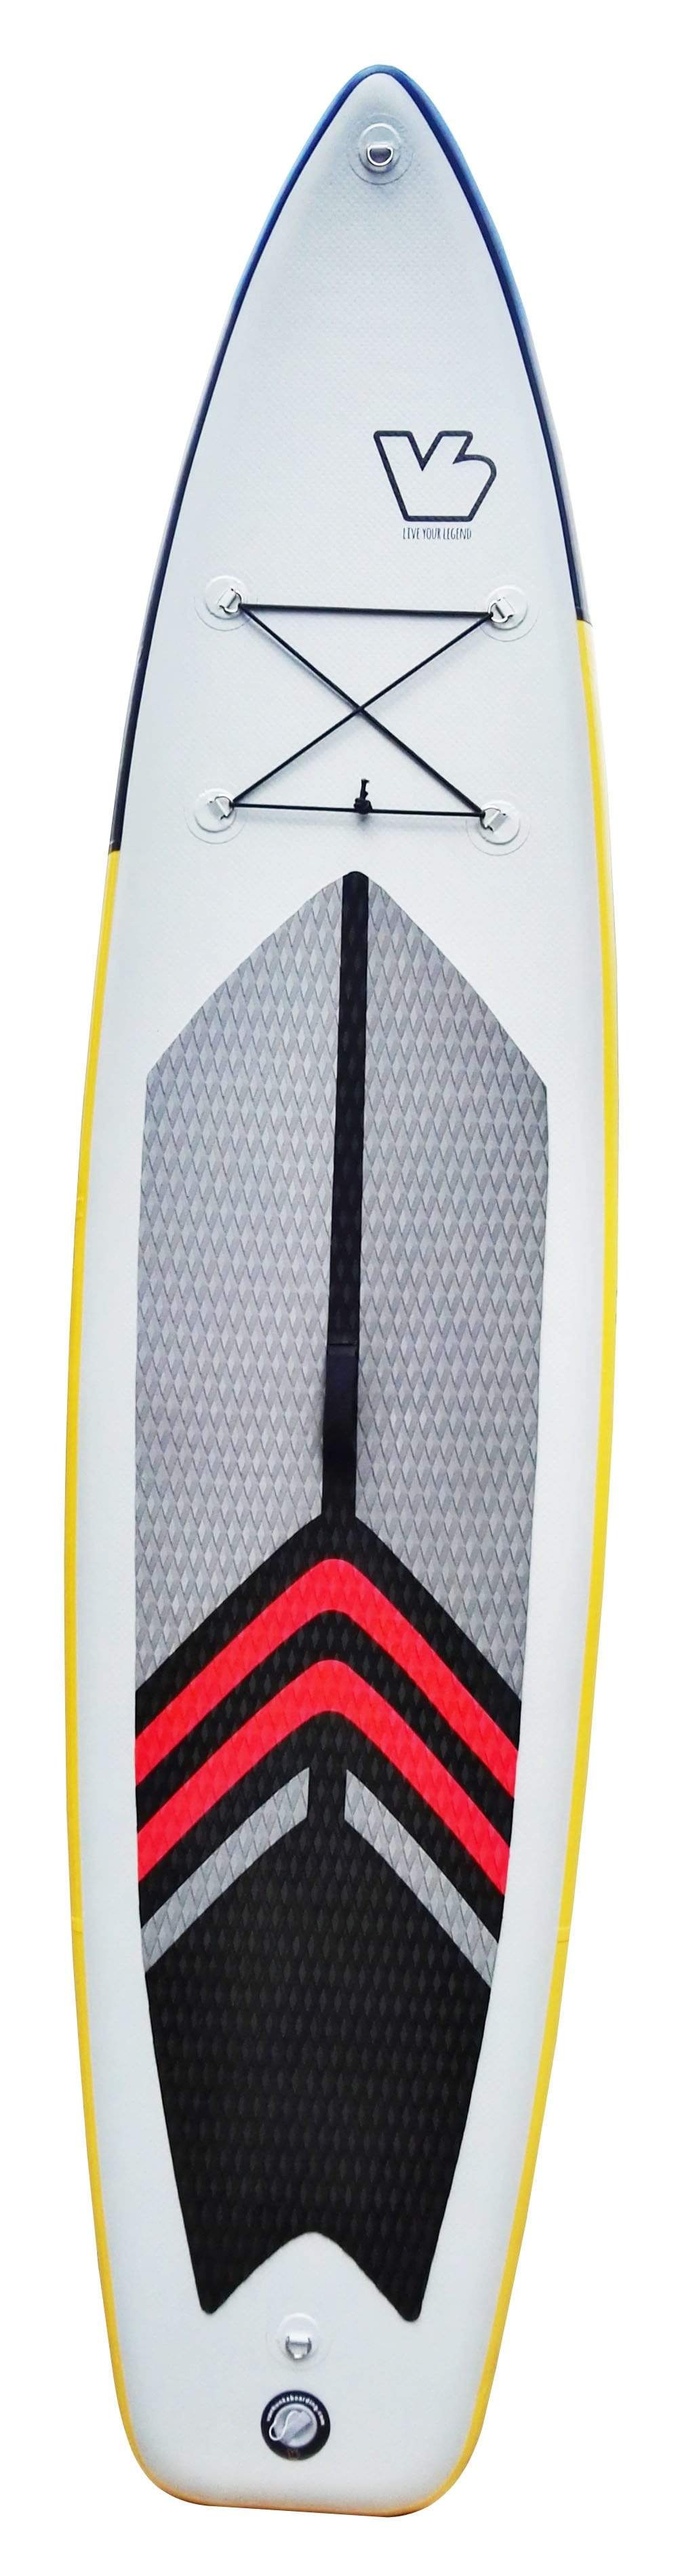 Vanhunks Spear Inflatable SUP